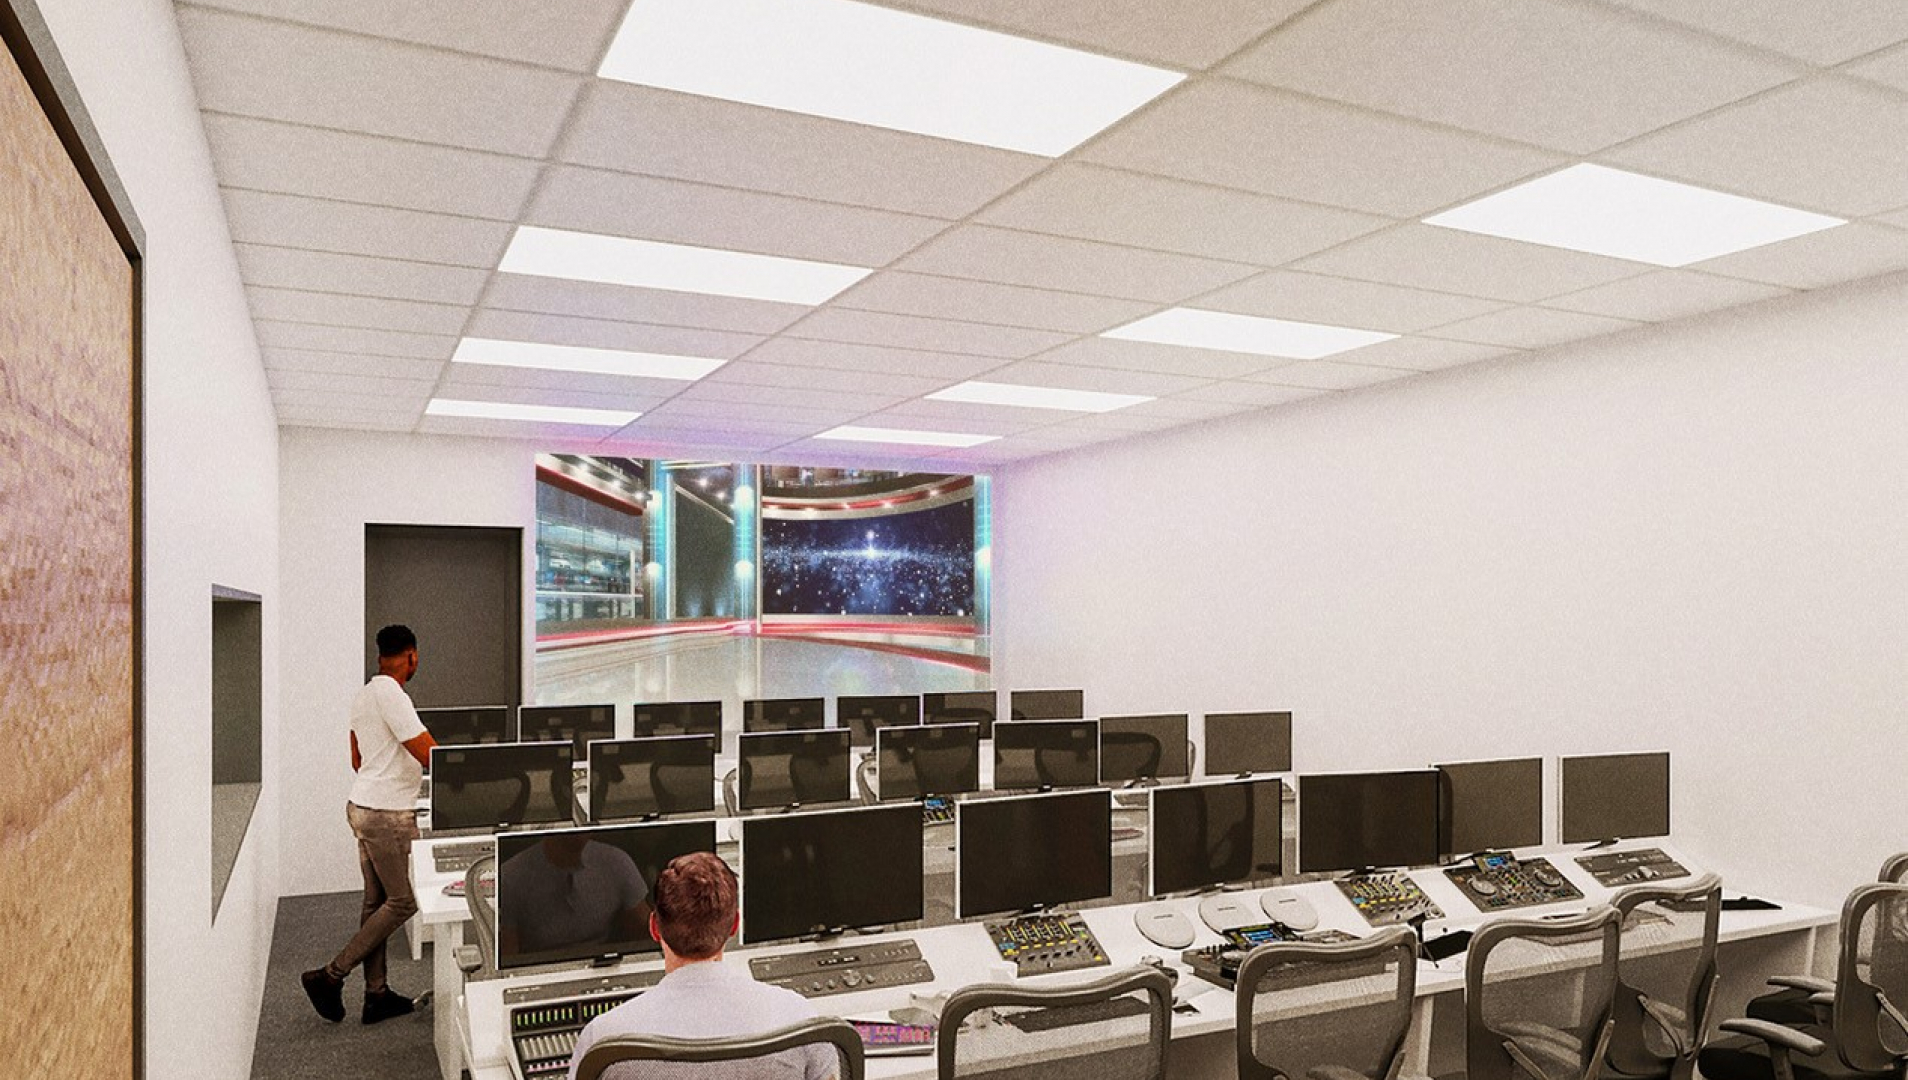 Photo shows a rendering of a Production Control Centre with the appropriate technology, production equipment and media viewing capability for students 